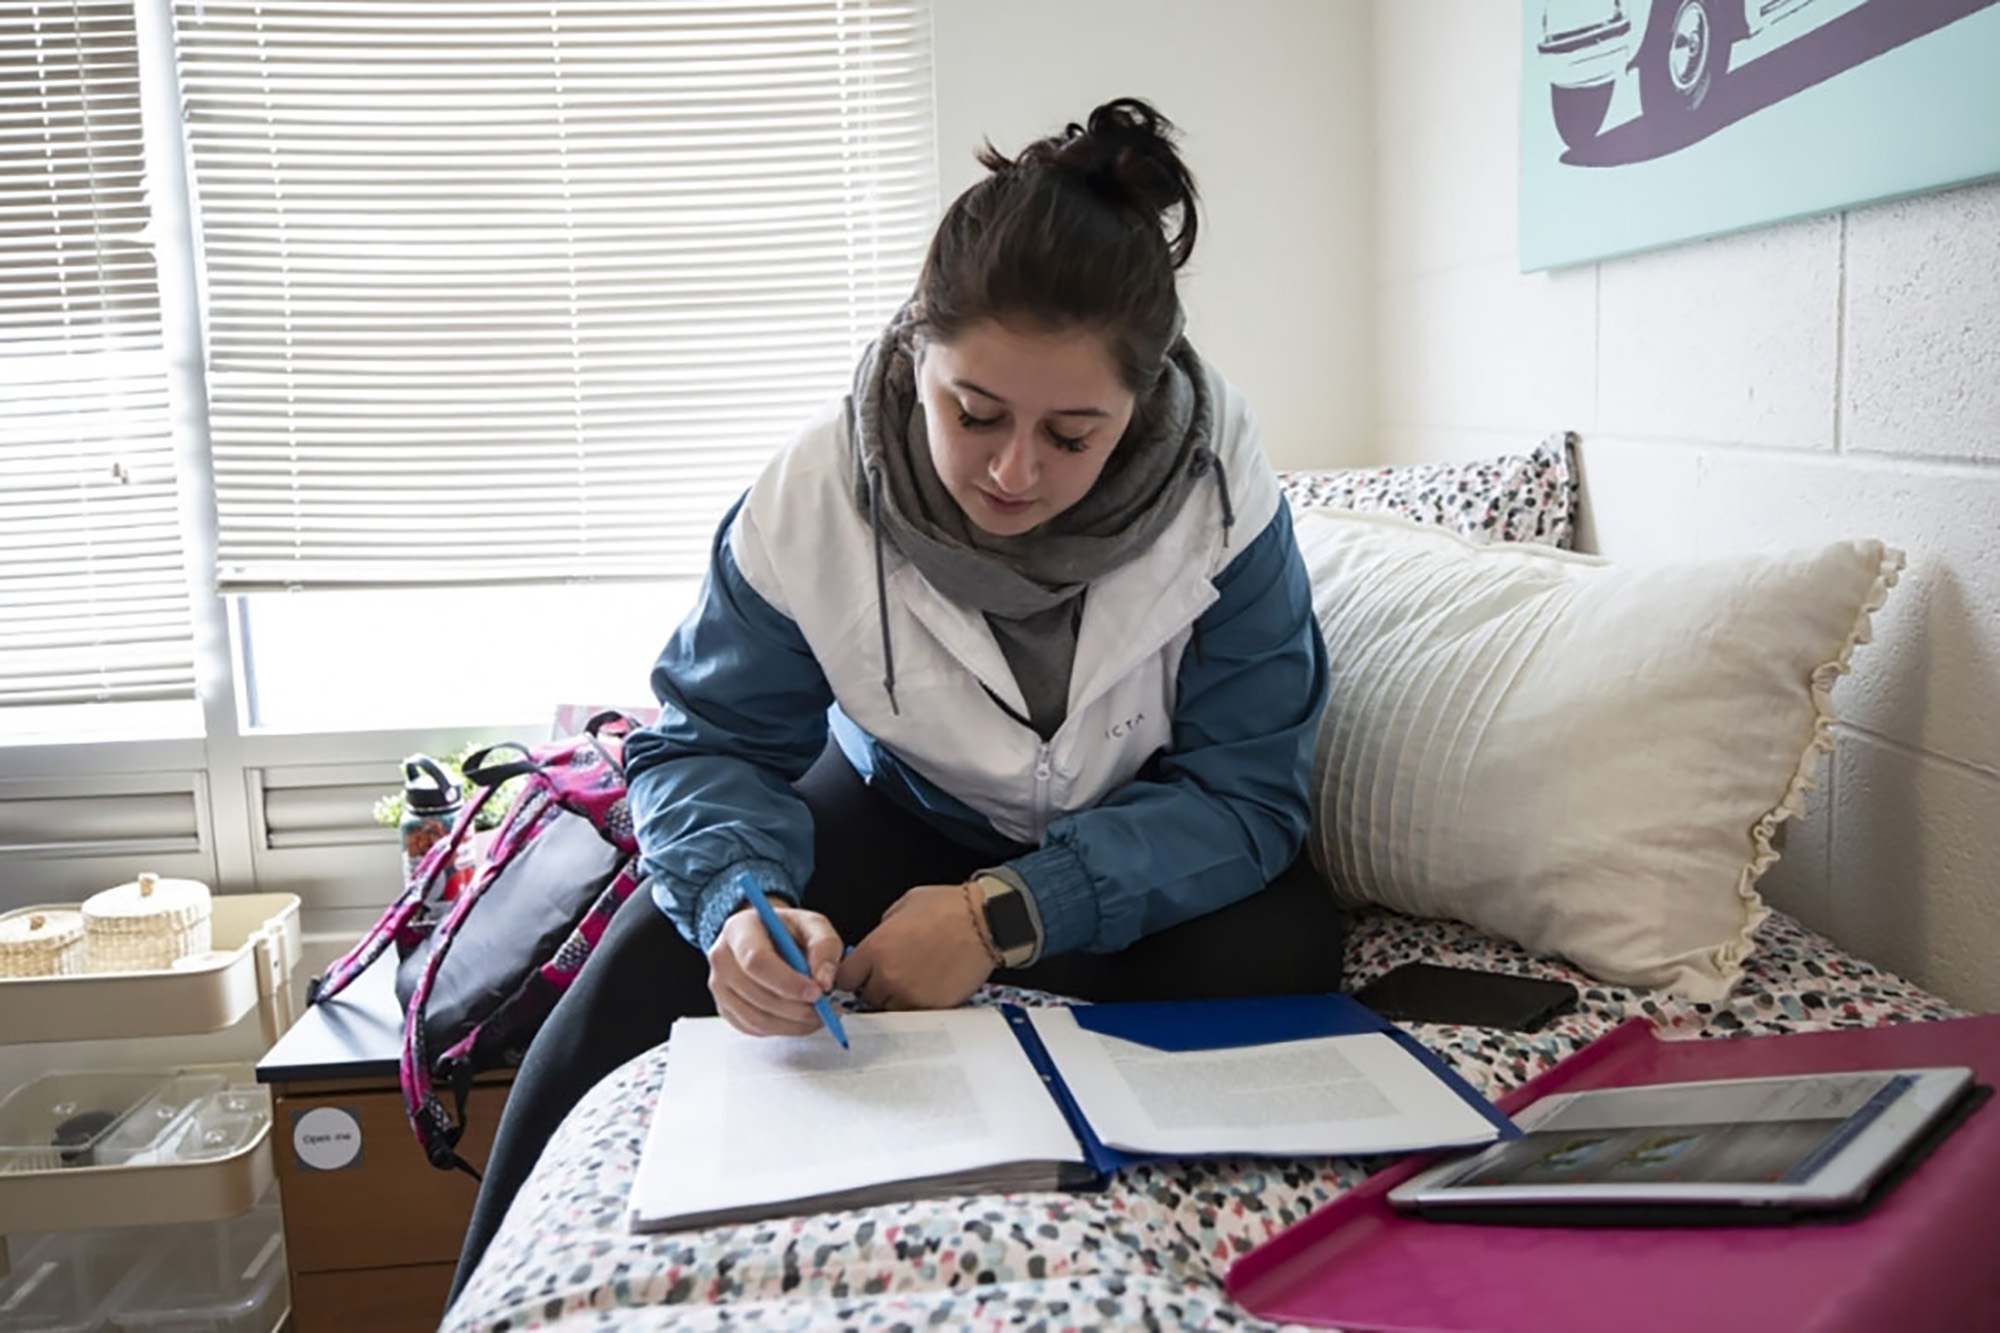 A female student studies in her dorm room.